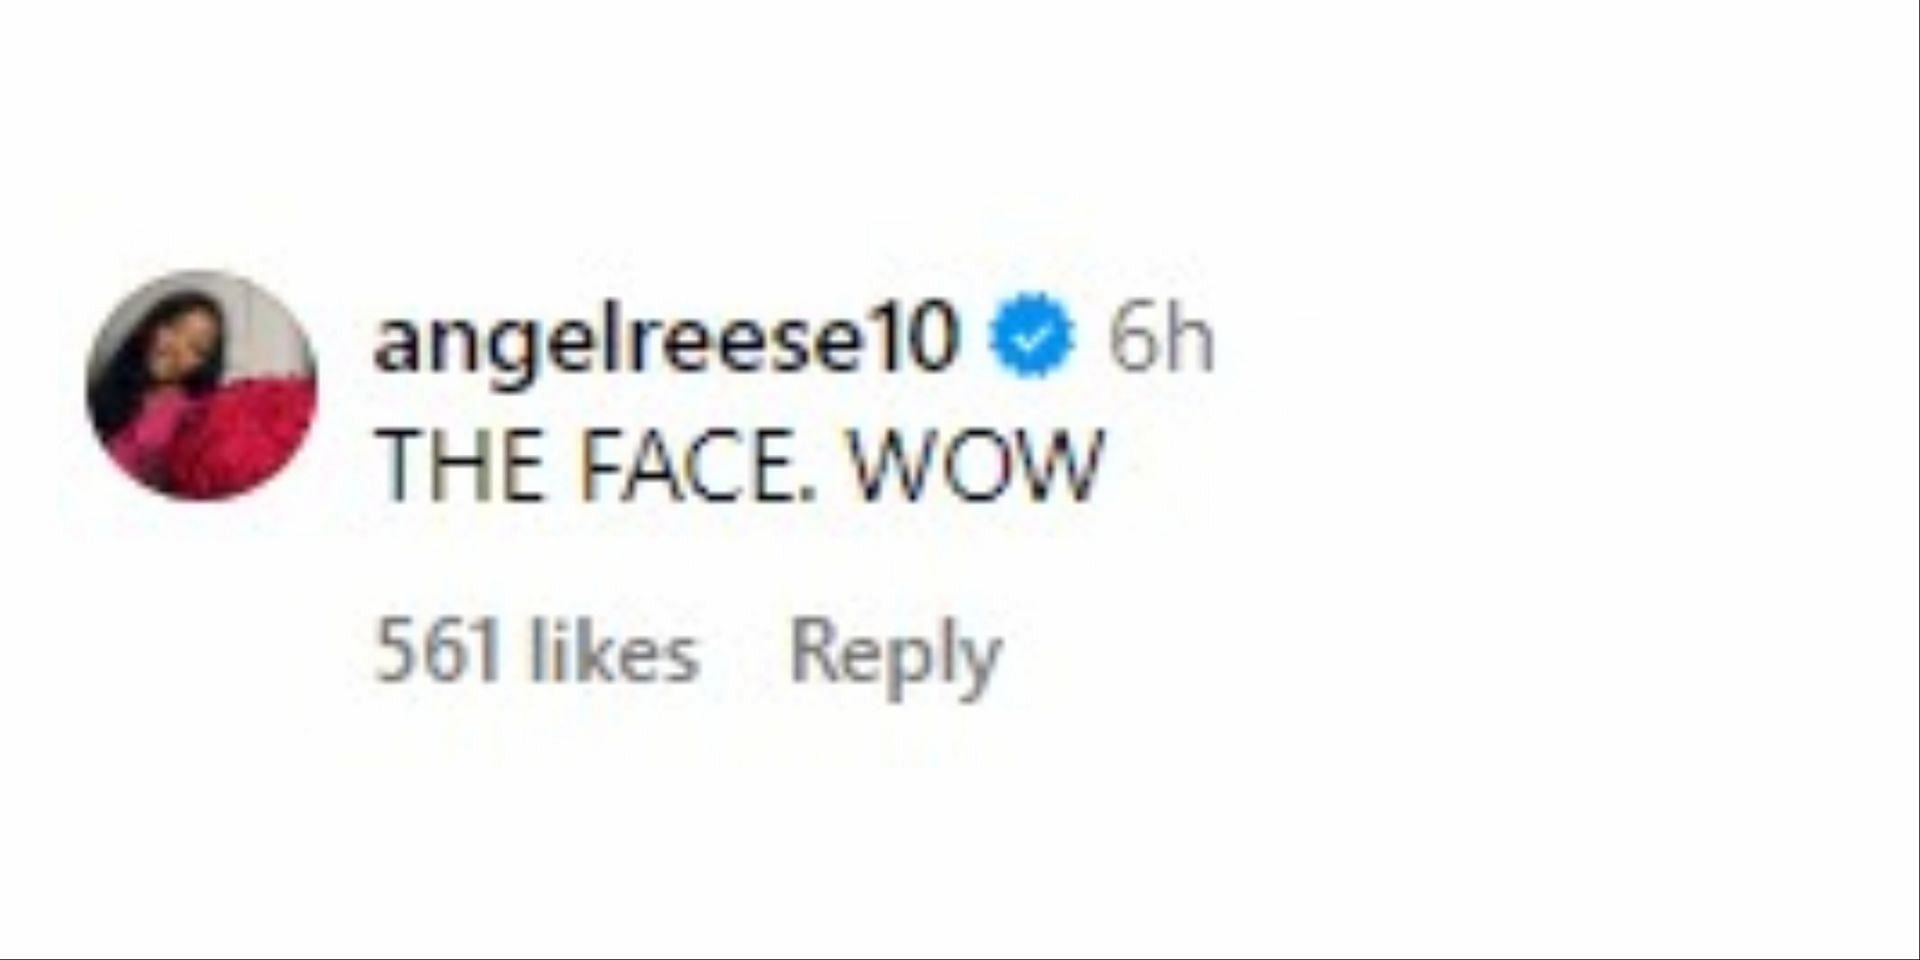 Reese left a comment admiring Brink&#039;s beauty